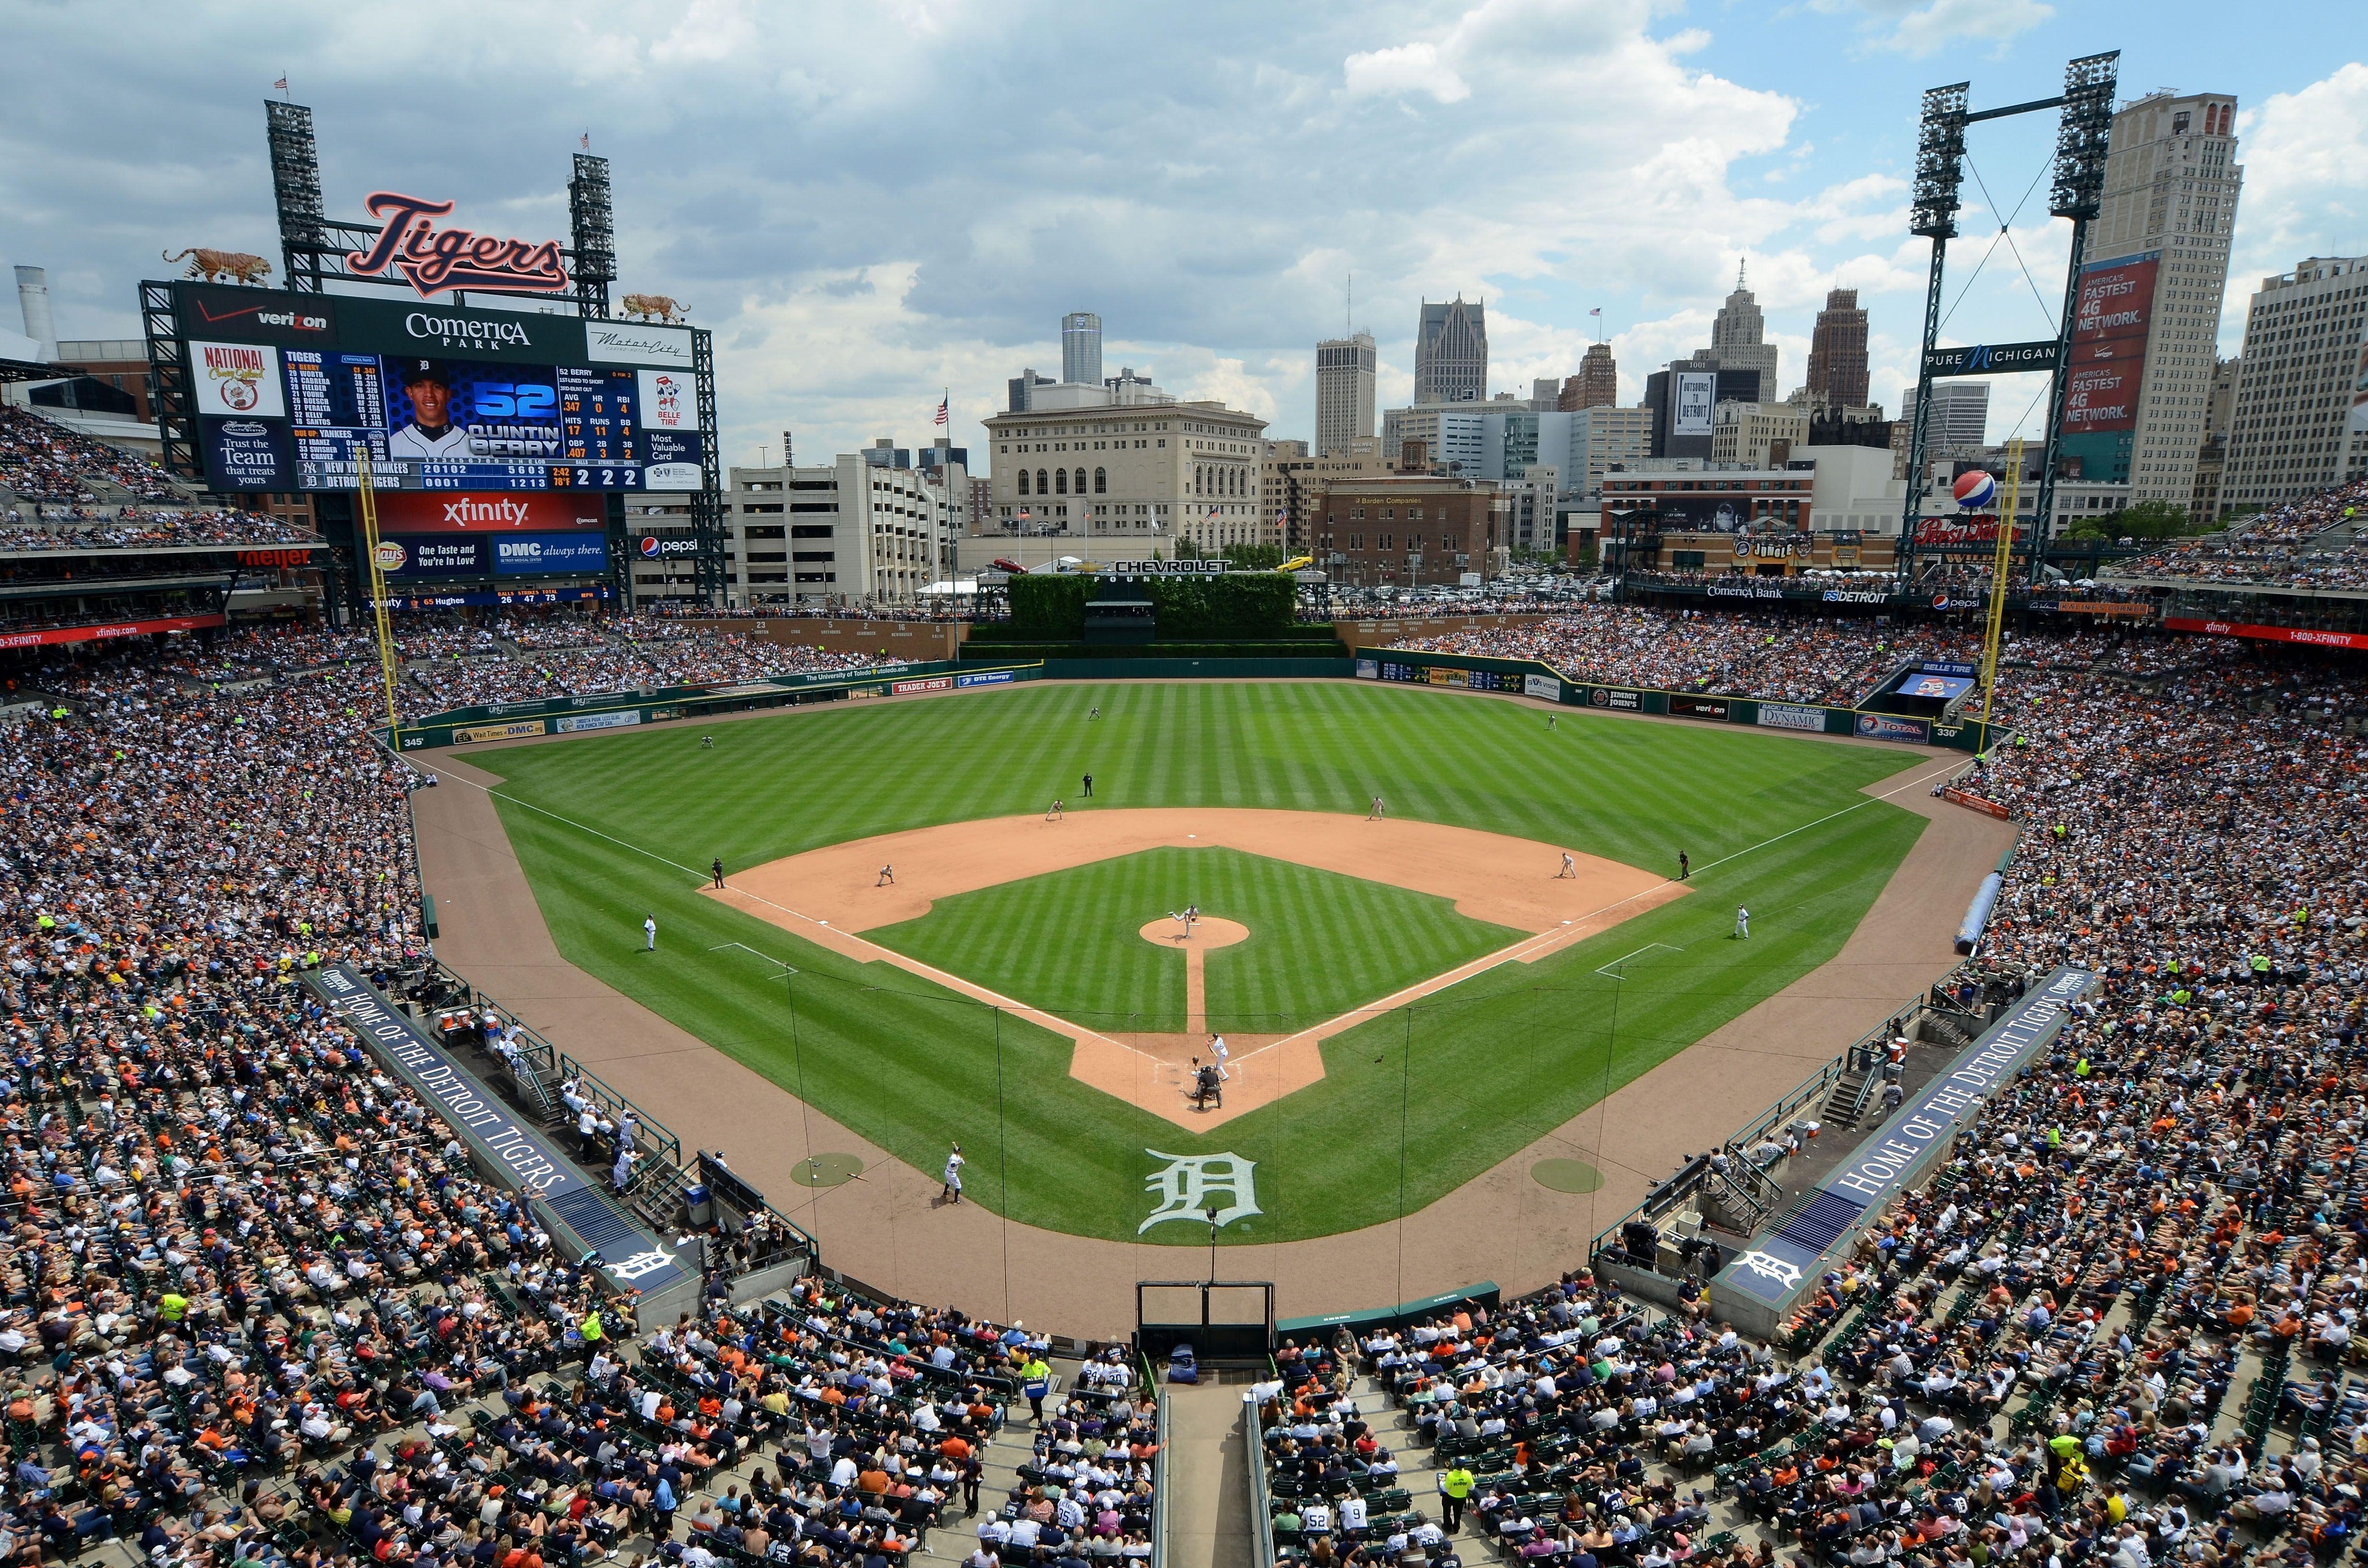 The view from above. Come to Comerica Park. Tiger stadium